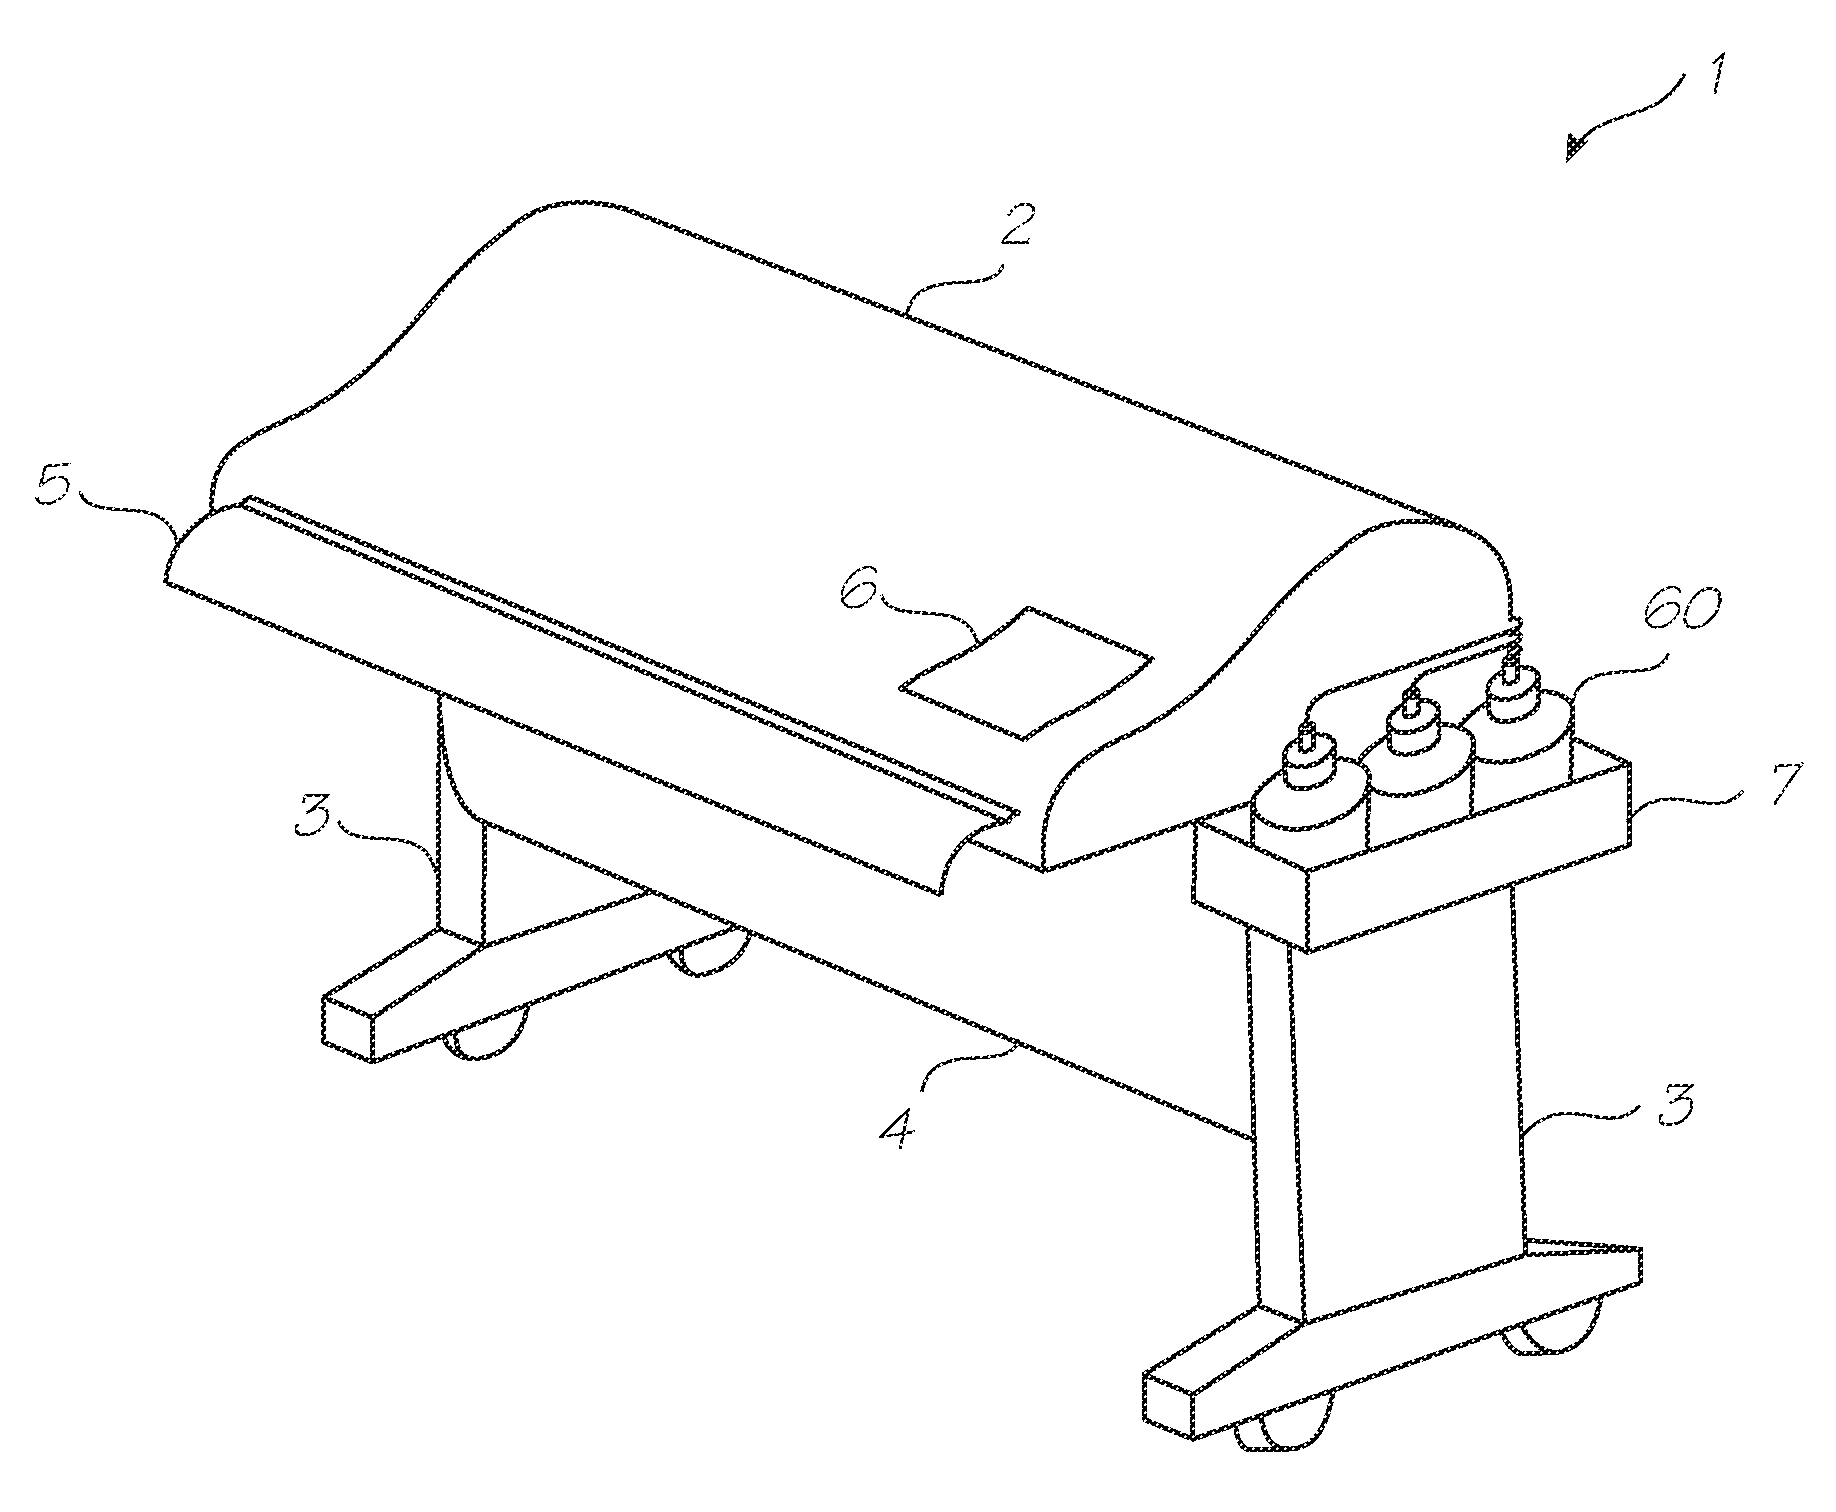 Printing system with input roller and movable media engagement output